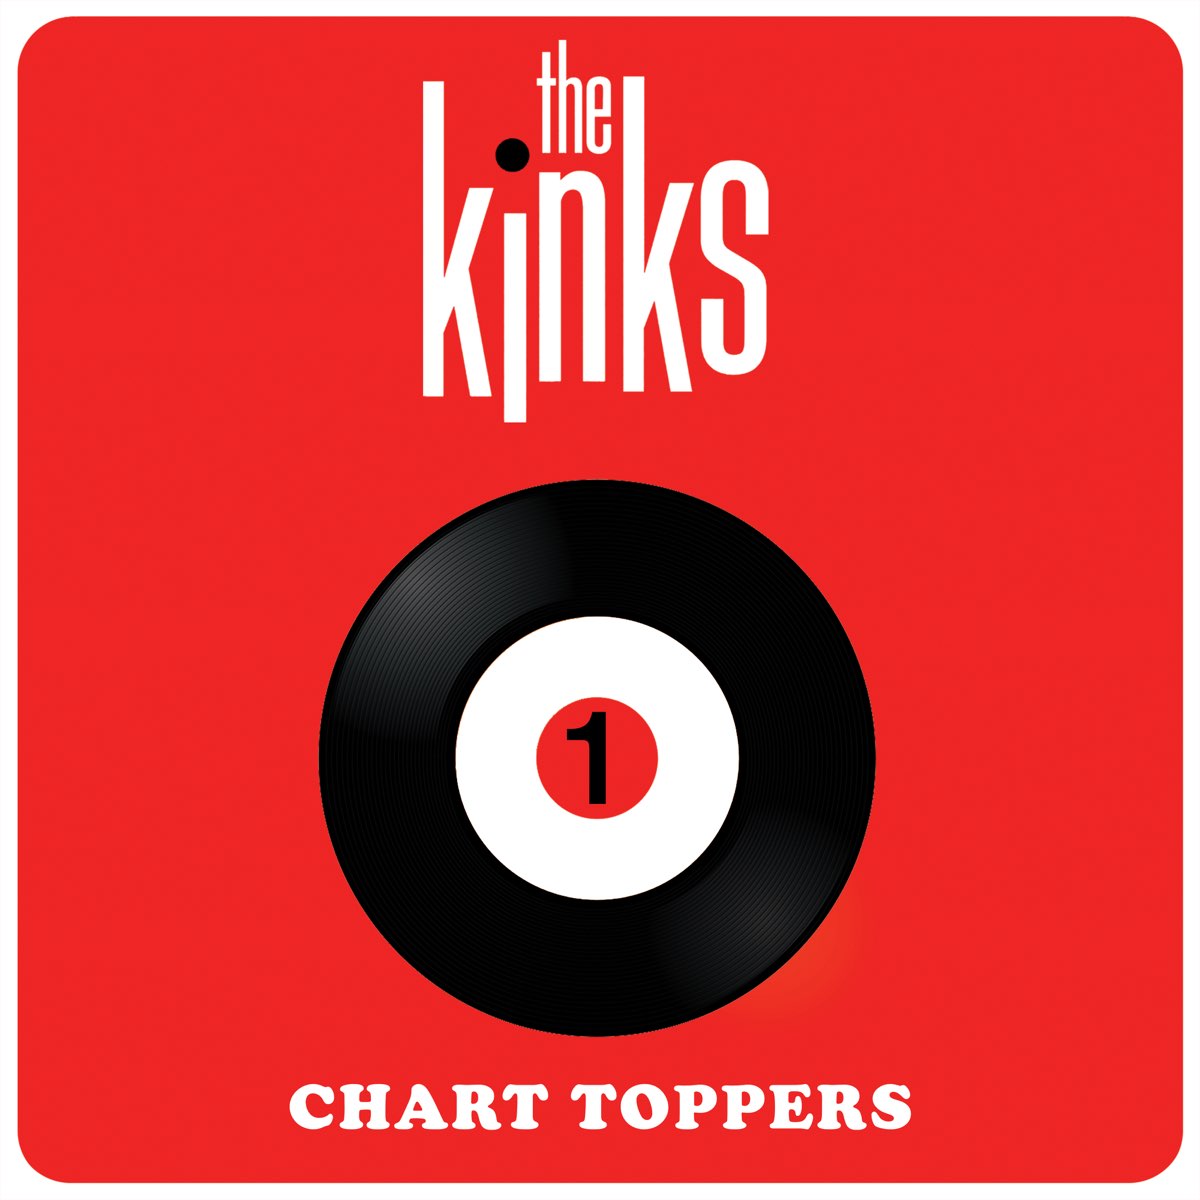 Chart Toppers - EP - Album by The Kinks - Apple Music